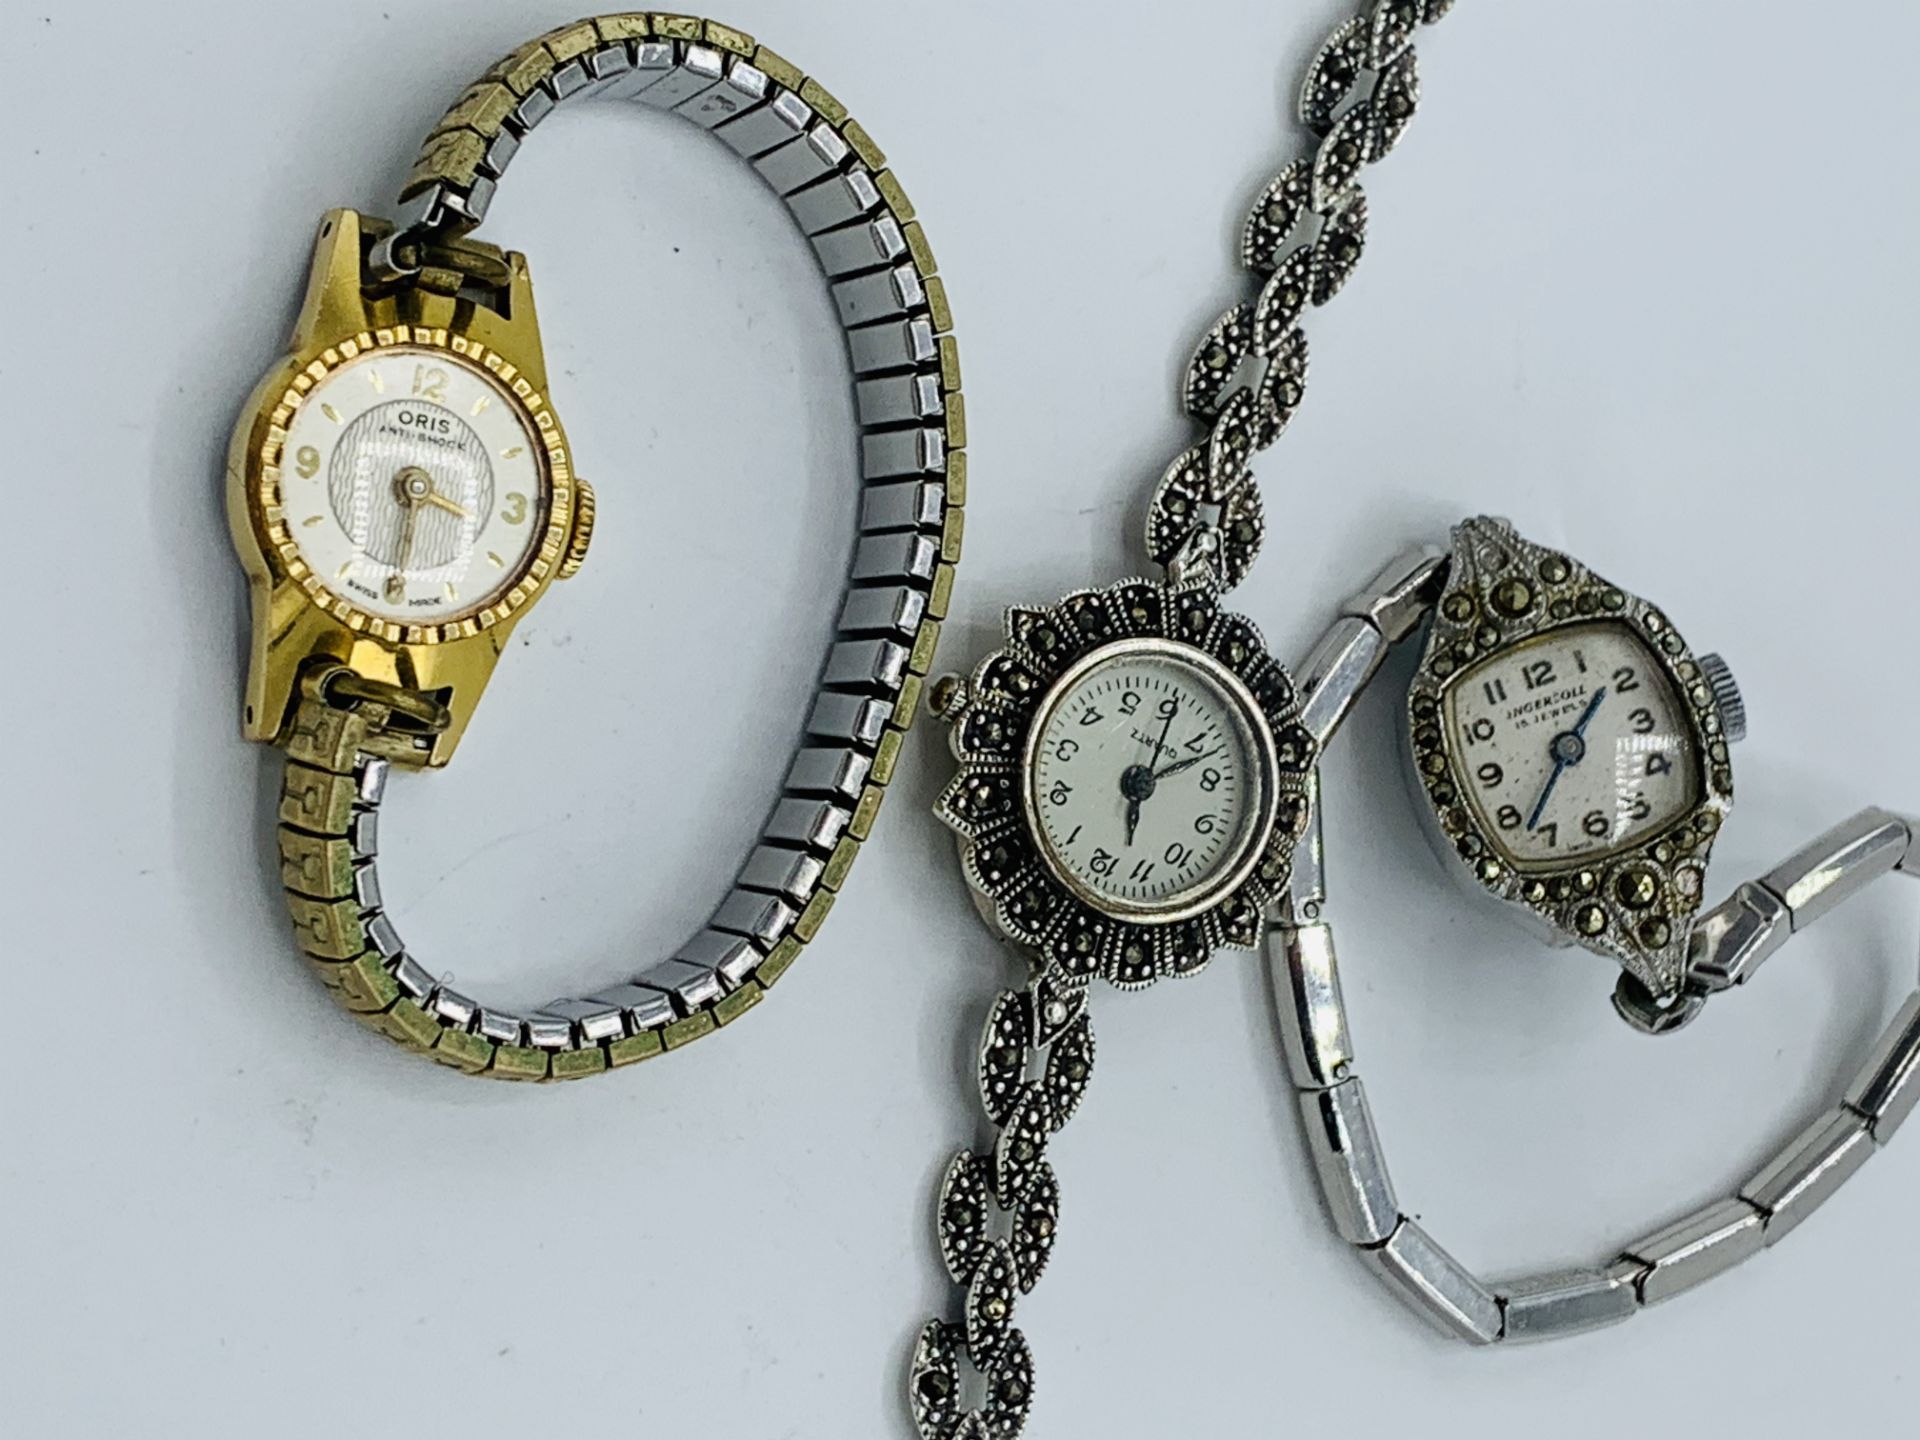 Lady’s wrist watch decorated with marcasite and 3 other watches